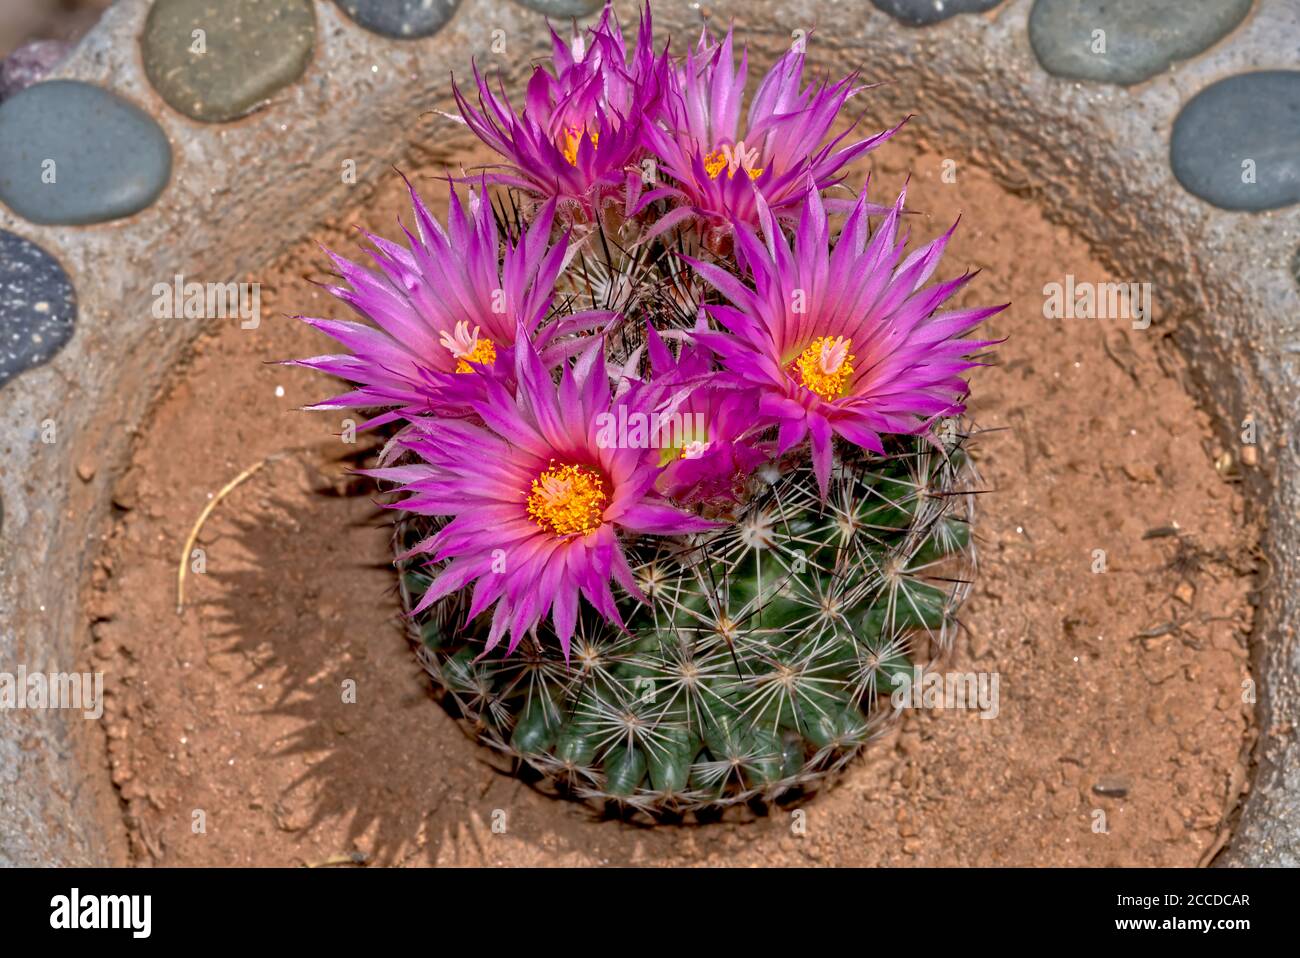 Flower of the Escobaria Vivipara cactus, also known as the Pin Cushion Cactus. This cactus ranges from Mexico to southern Canada. Stock Photo